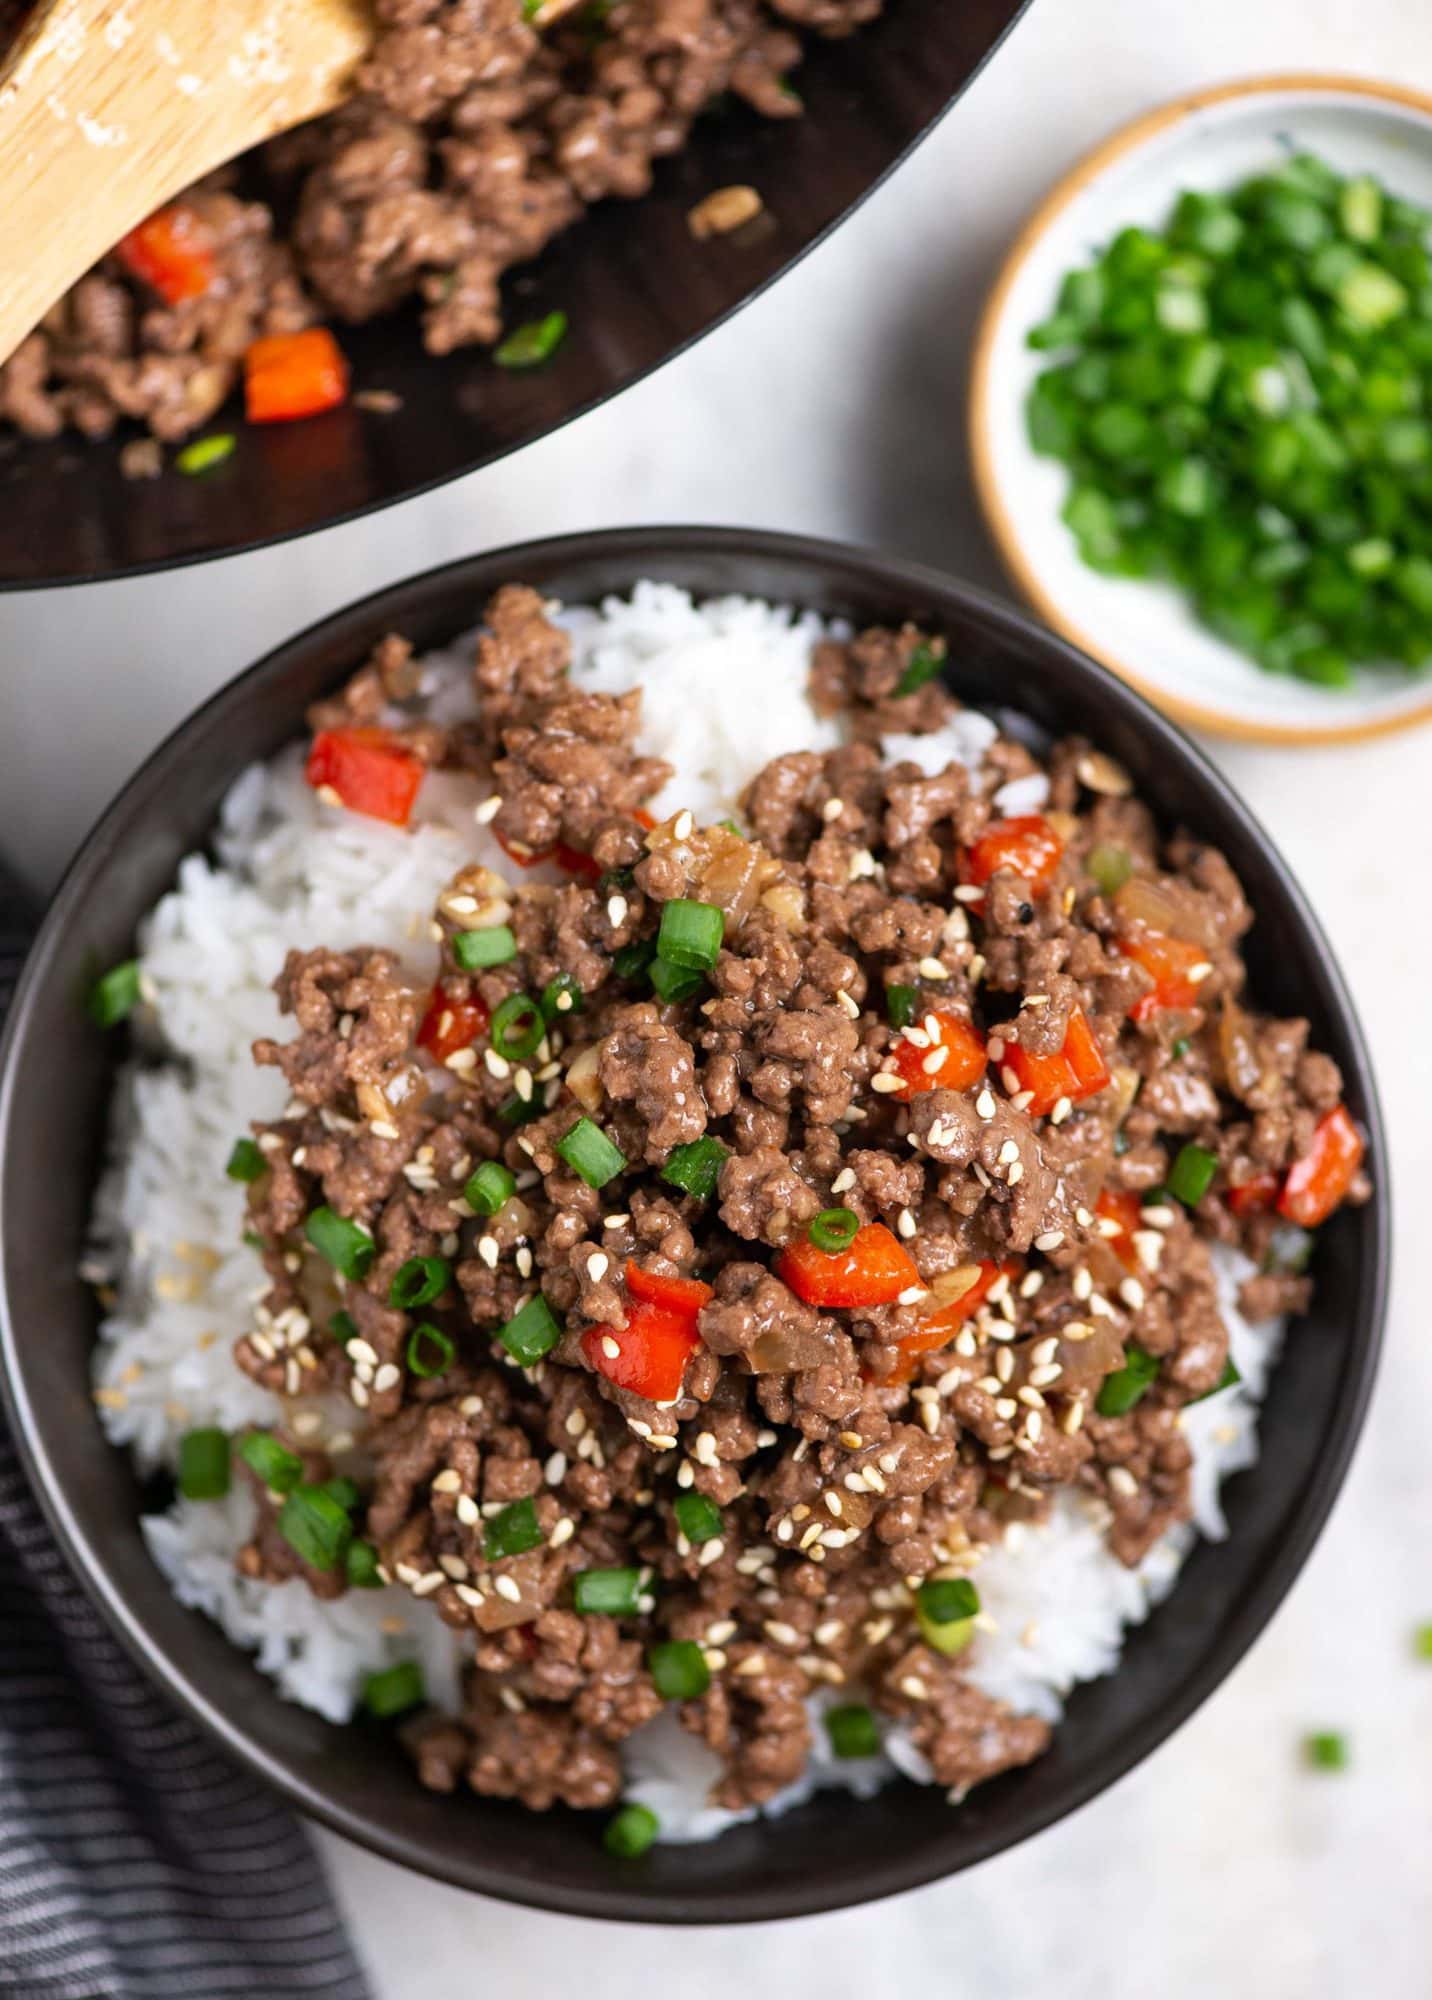 Top view of korean inspired juicy ground beef having red bell pepper and green onion stir fried served in a bowl on top of white rice.